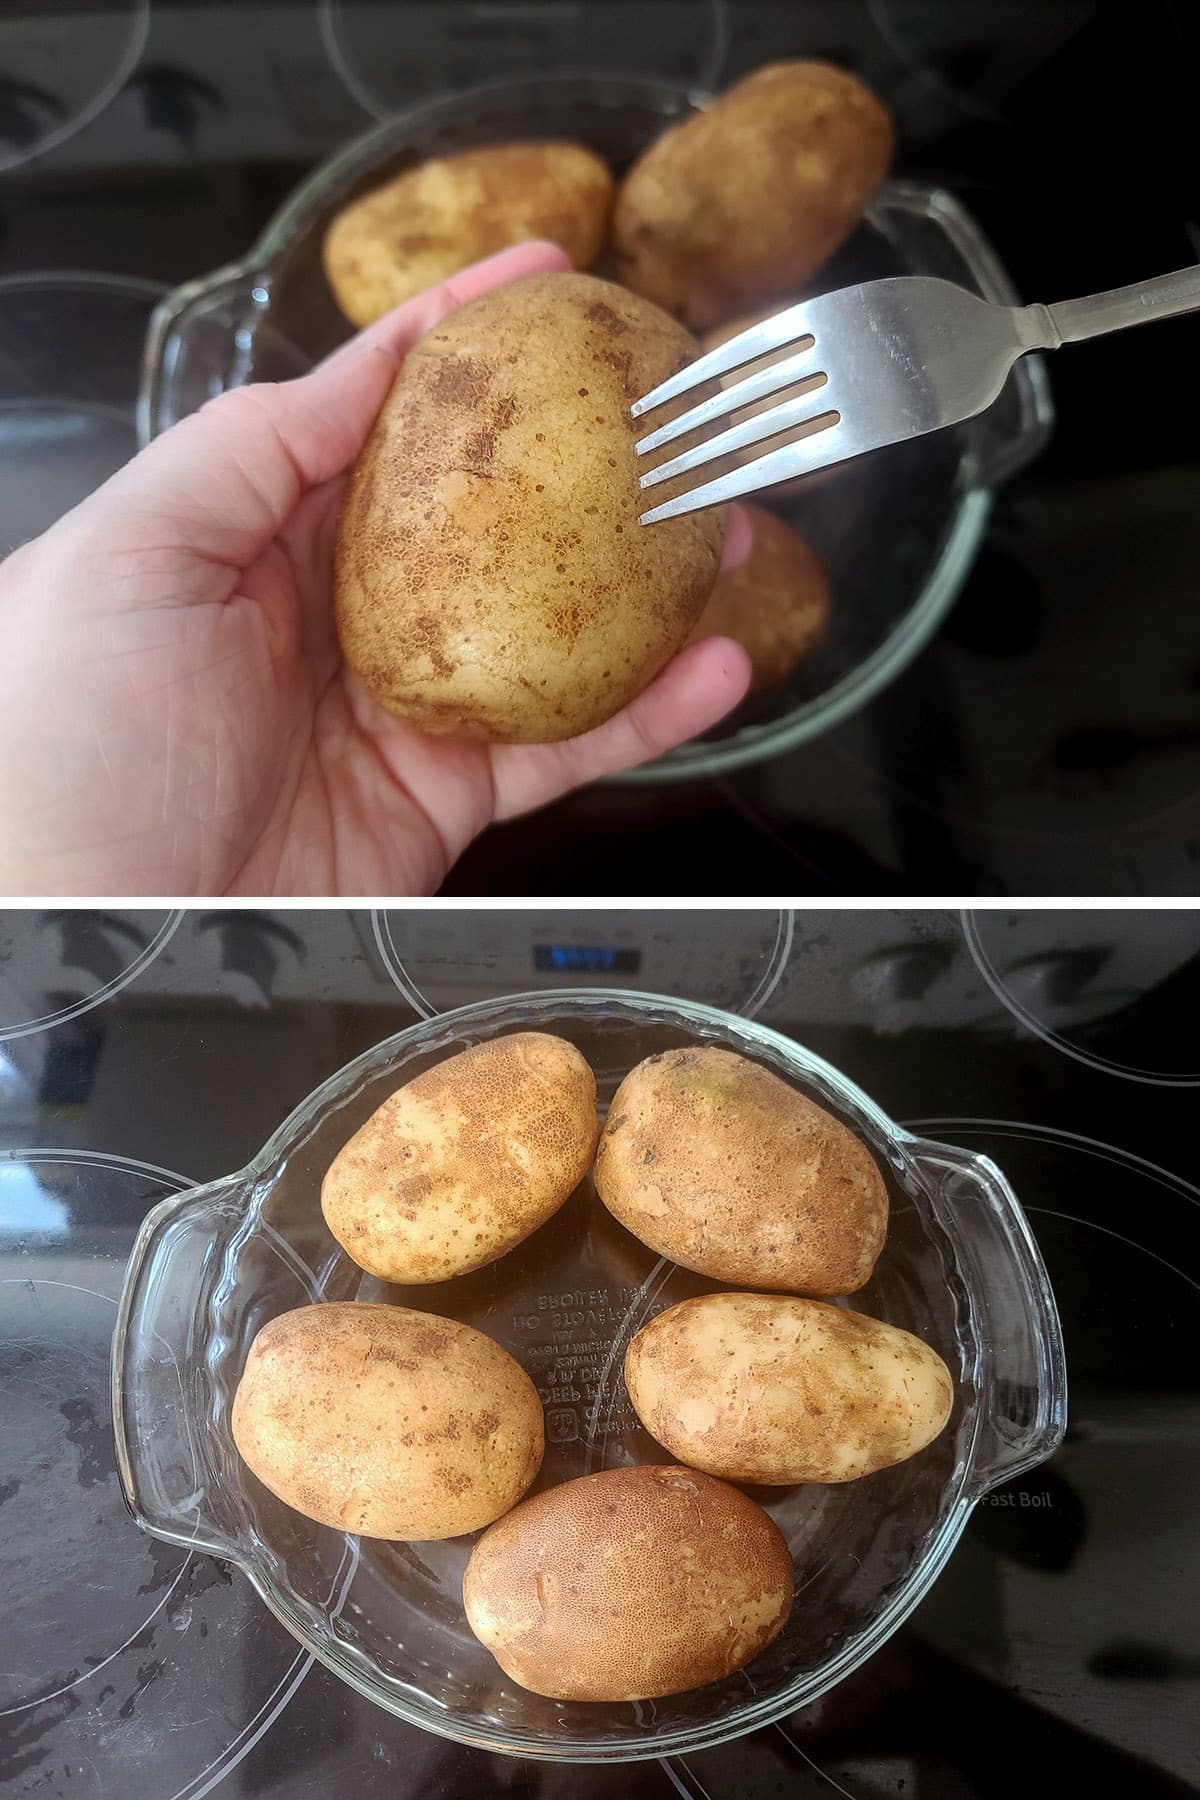 A 2 part image showing the potatoes being pricked with a fork and arranged in a glass baking dish.